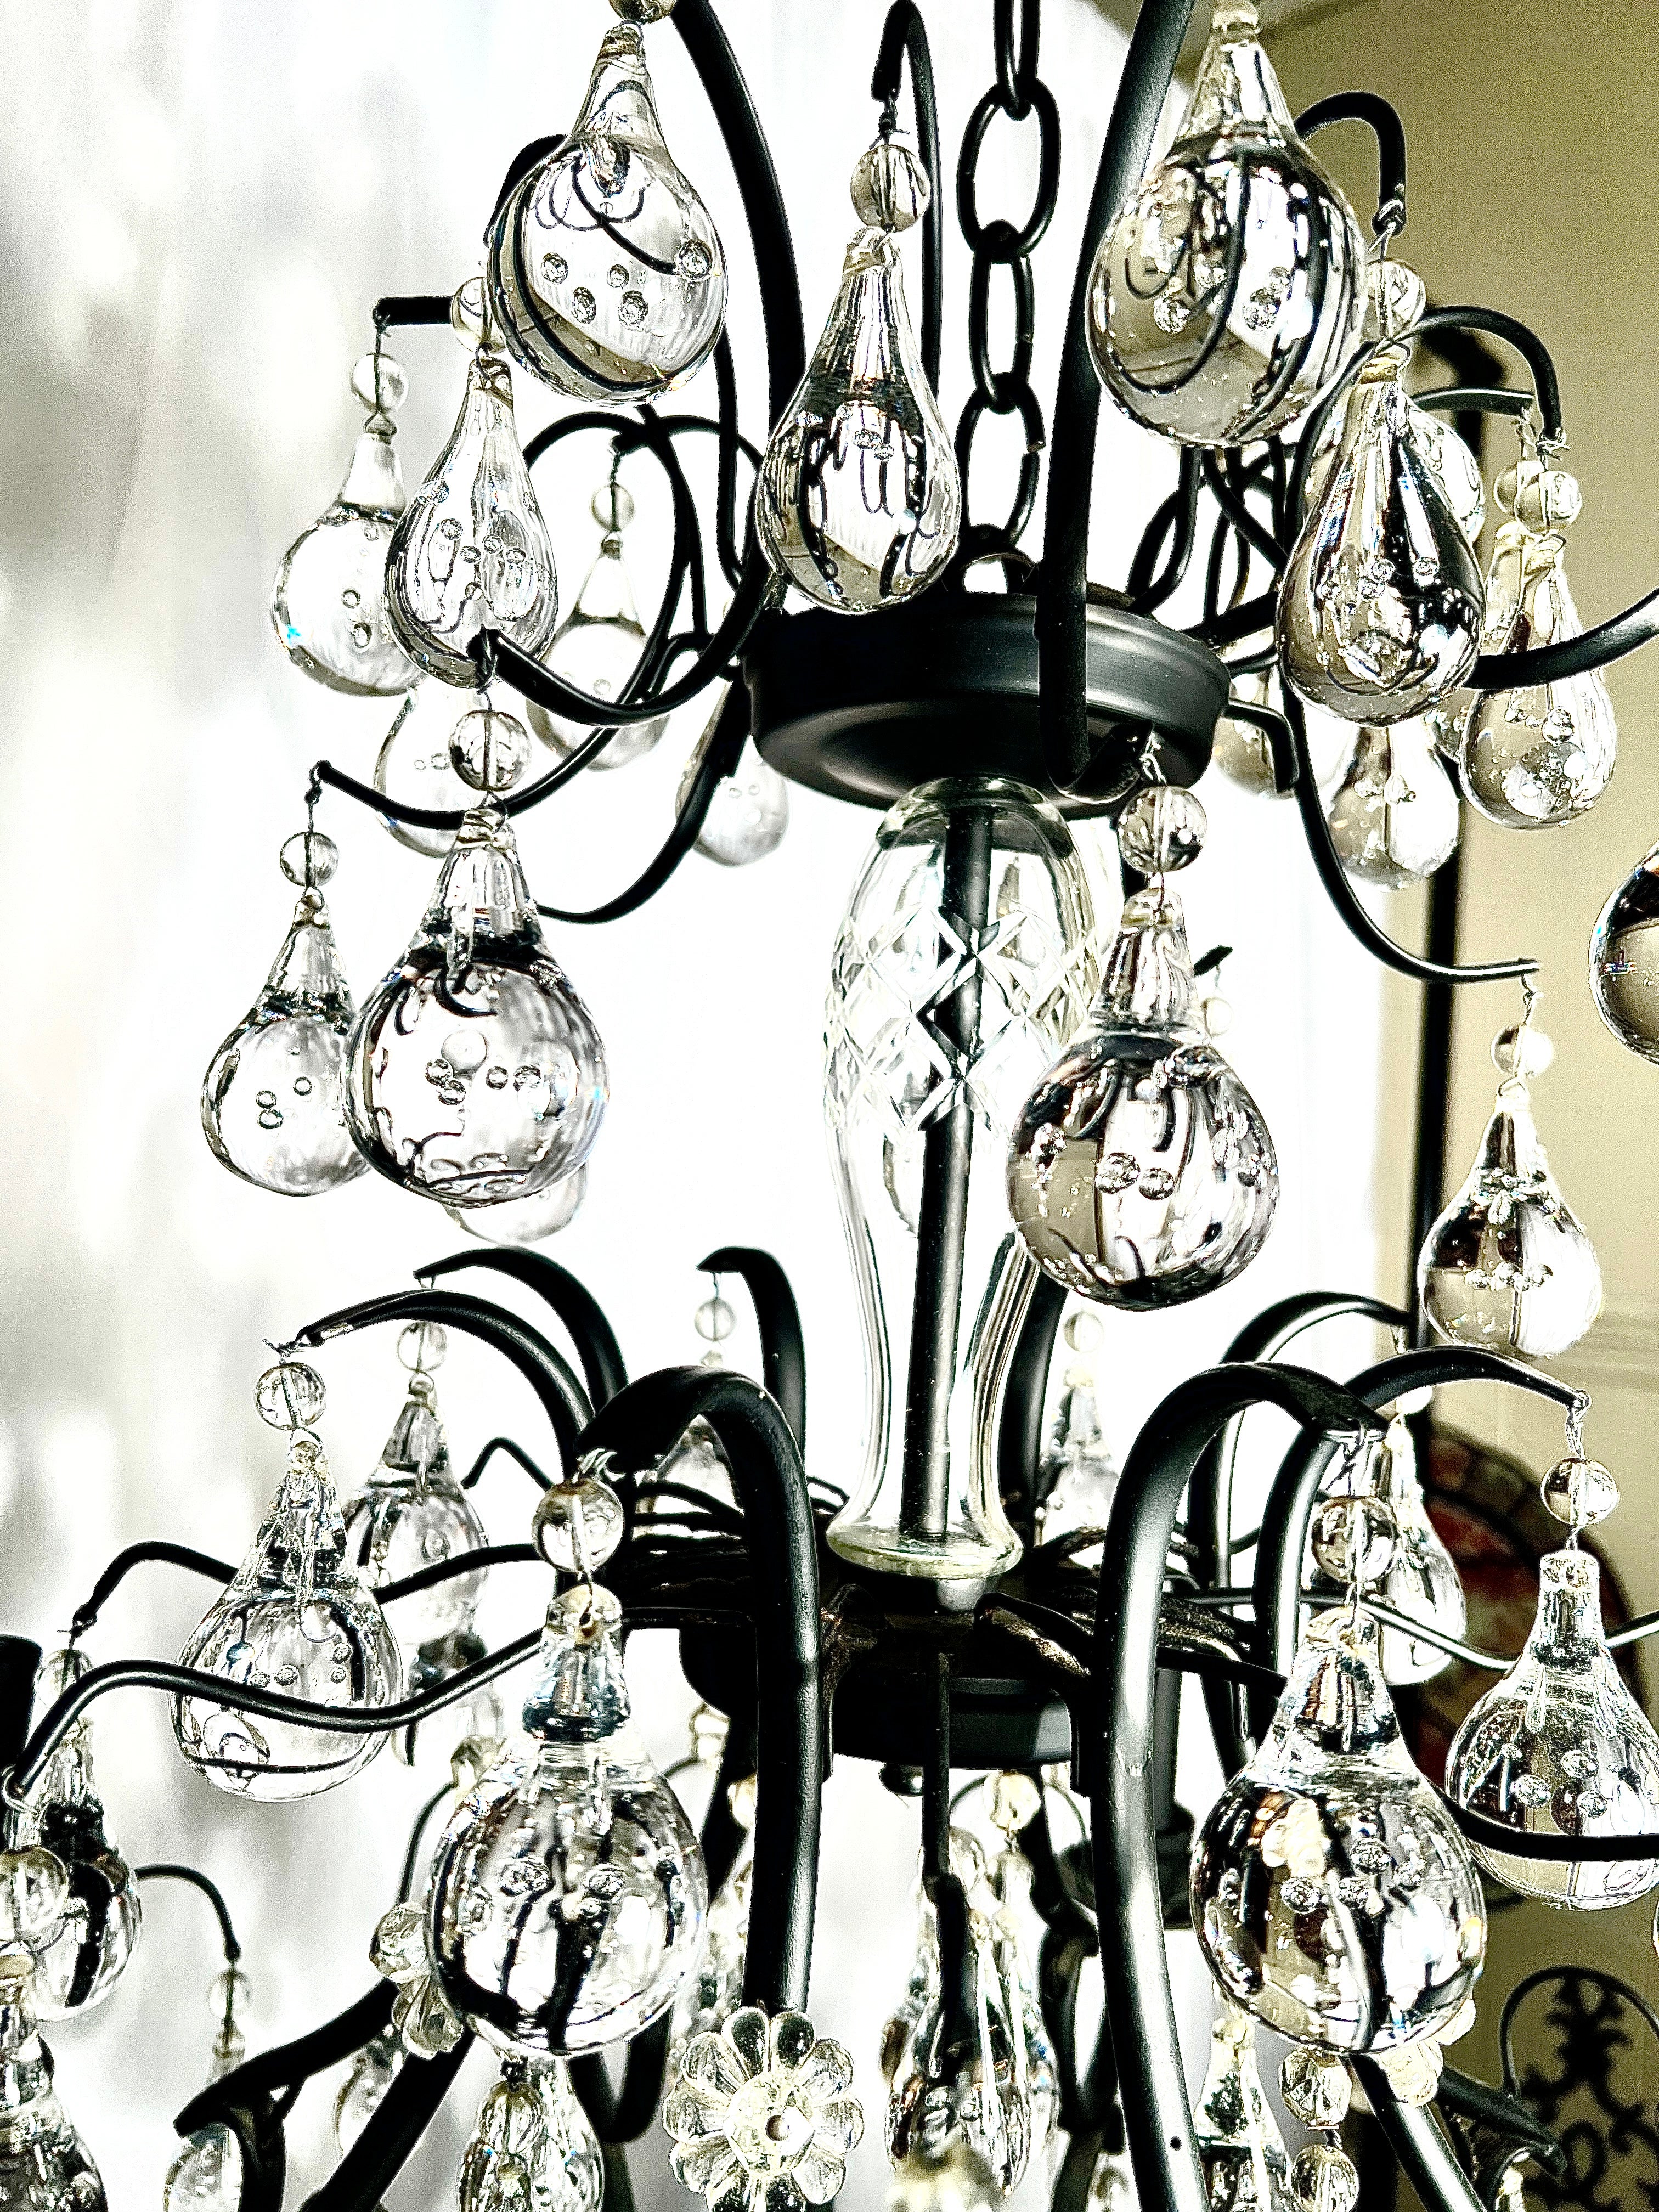 Estate French Wrought Iron and Crystal Chandelier, Circa 1950's.
With crystal teardrop prisms.